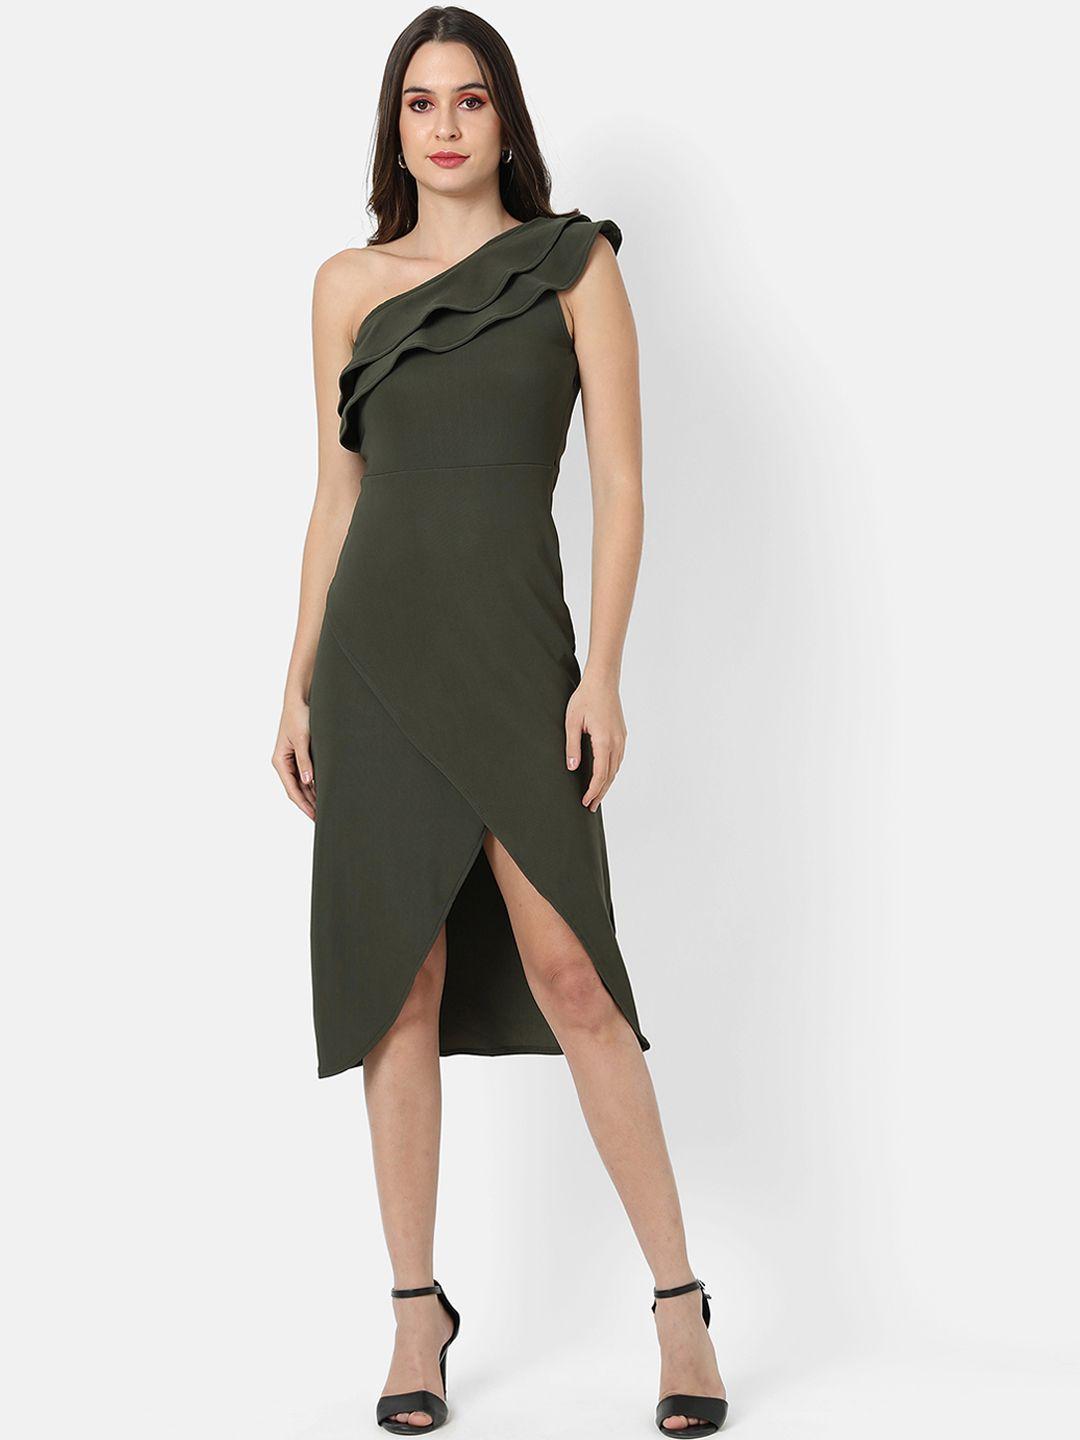 campus-sutra-olive-green-one-shoulder-crepe-a-line-midi-dress